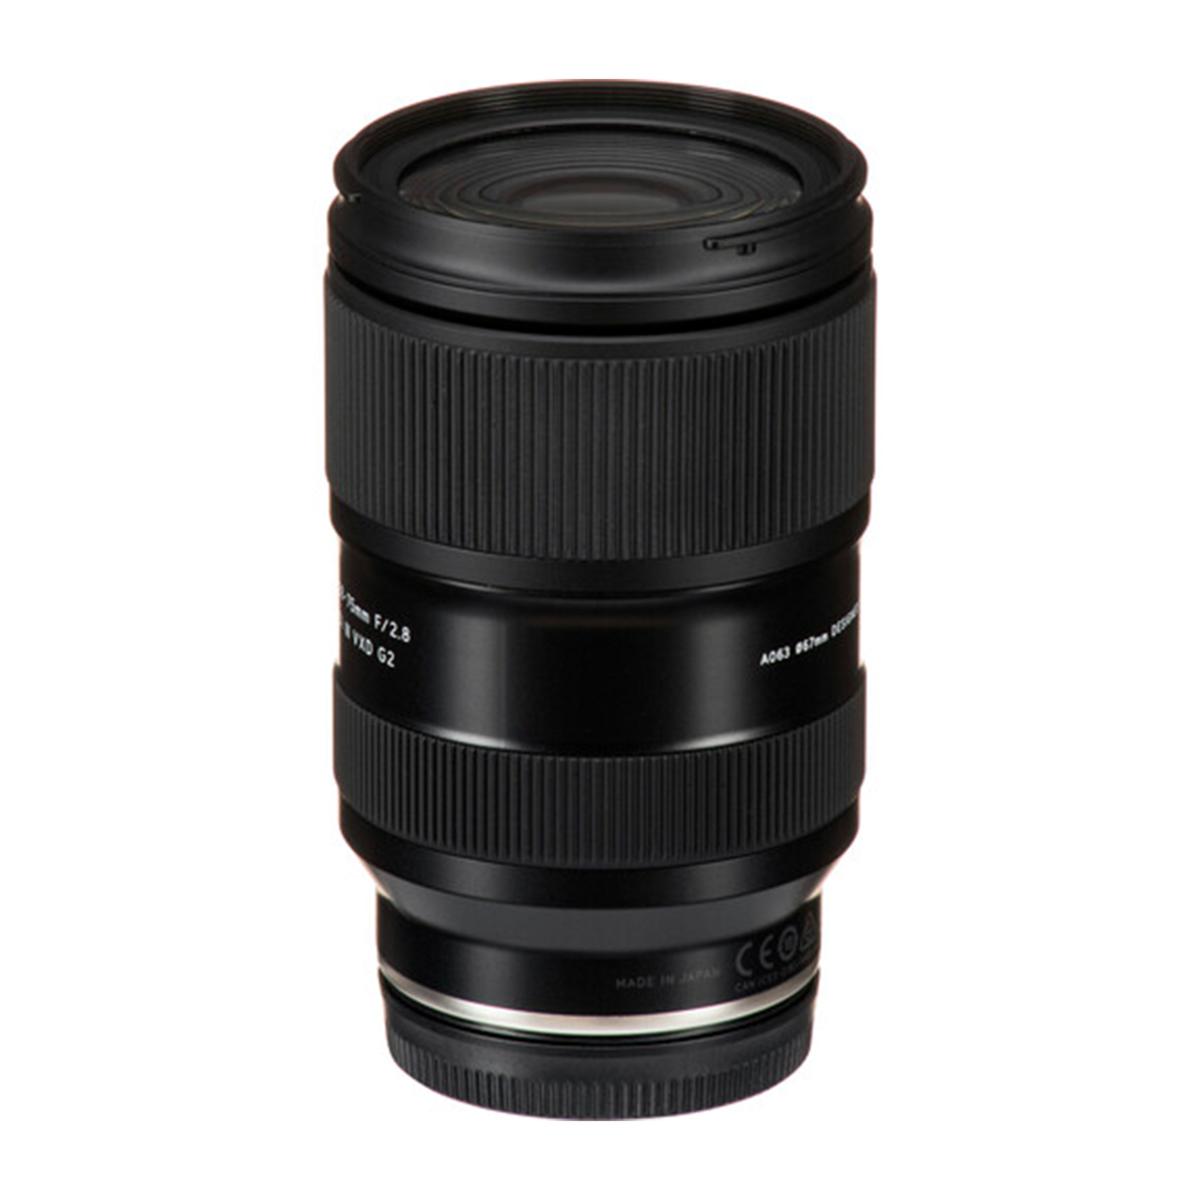 Tamron 28-75mm f/2.8 Di III VXD G2 Lens for Sony E - 20904825 | HSN